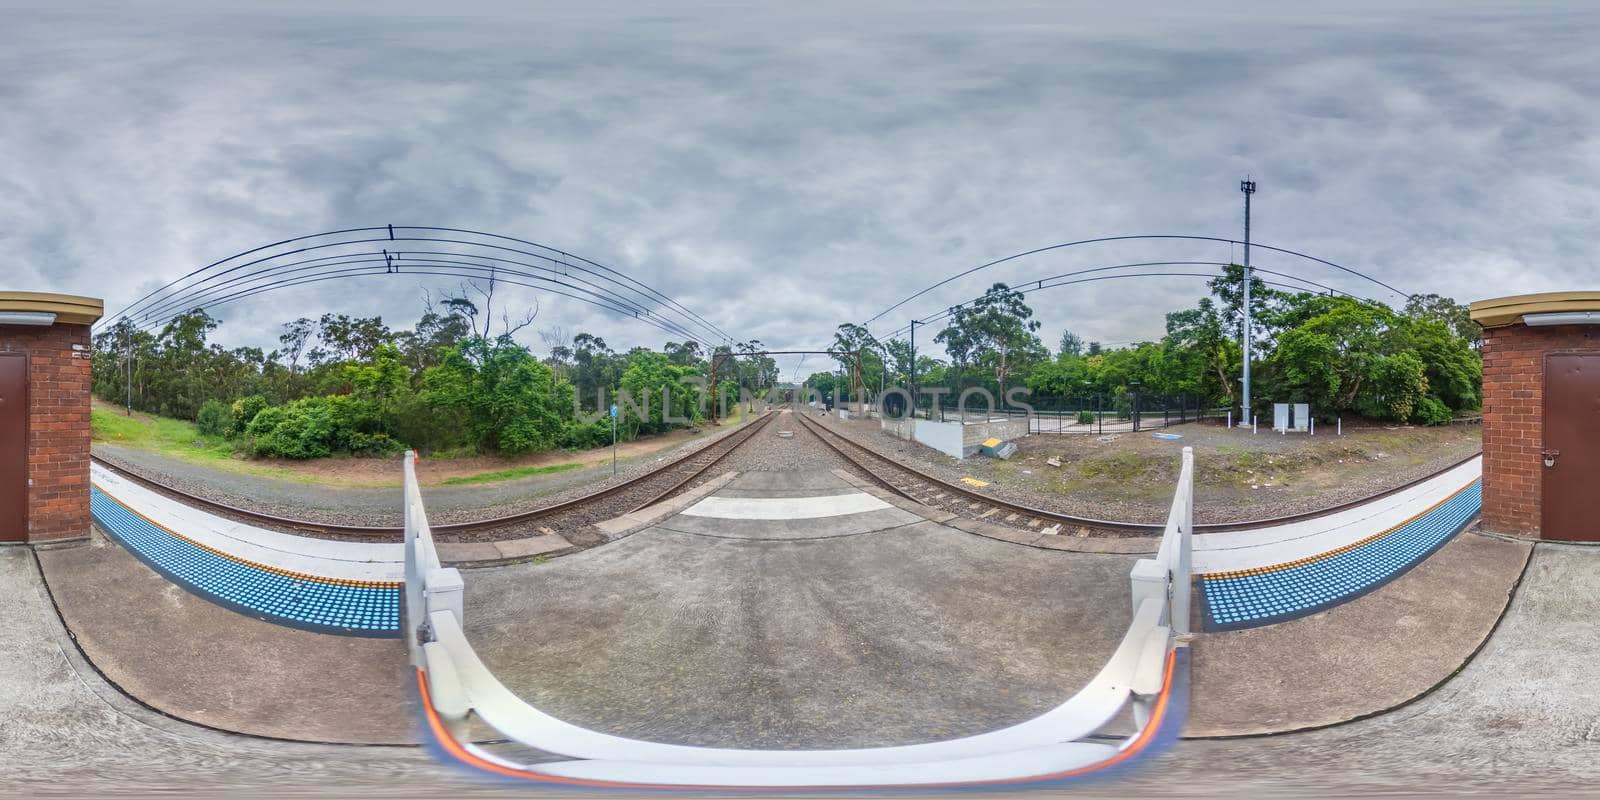 Spherical 360 panoramic photograph of Glenbrook Train Station in regional Australia by WittkePhotos